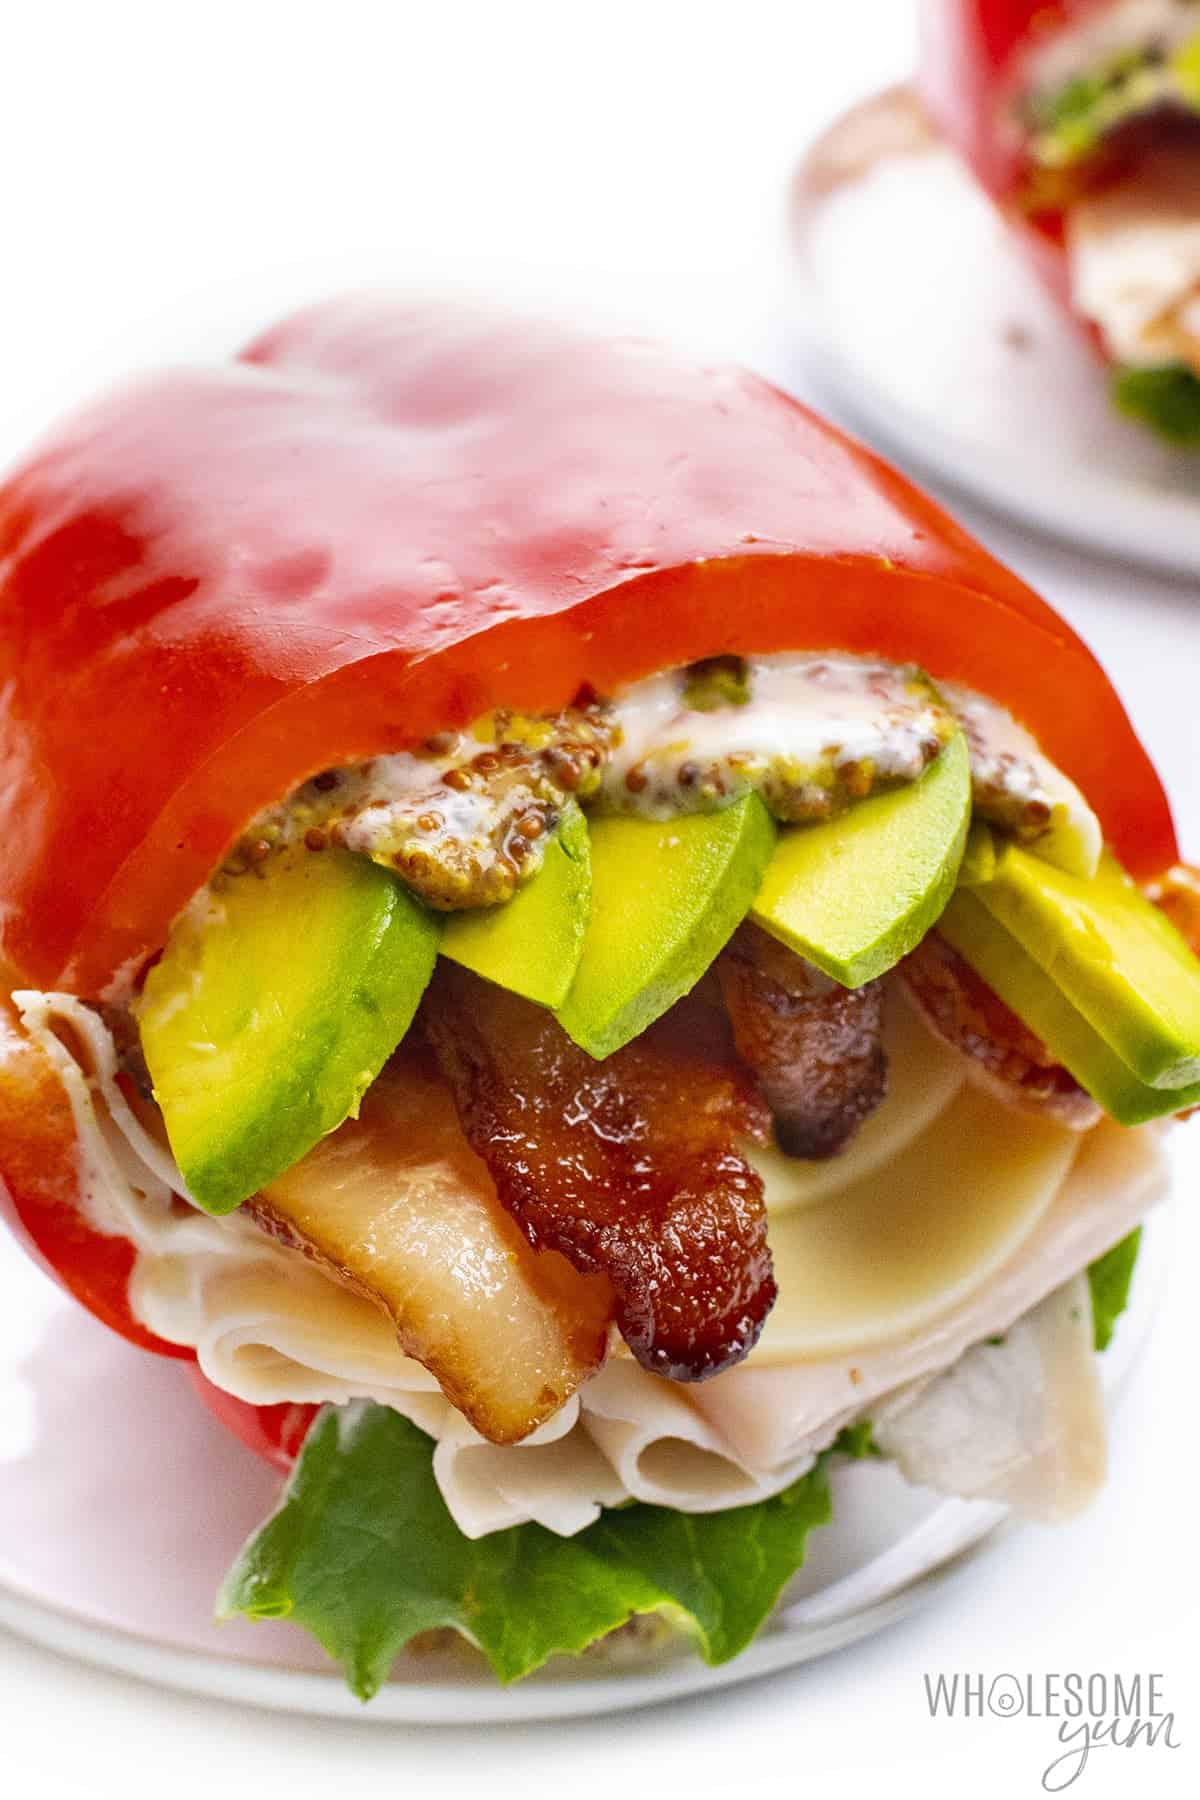 Red pepper sandwich with avocado and turkey